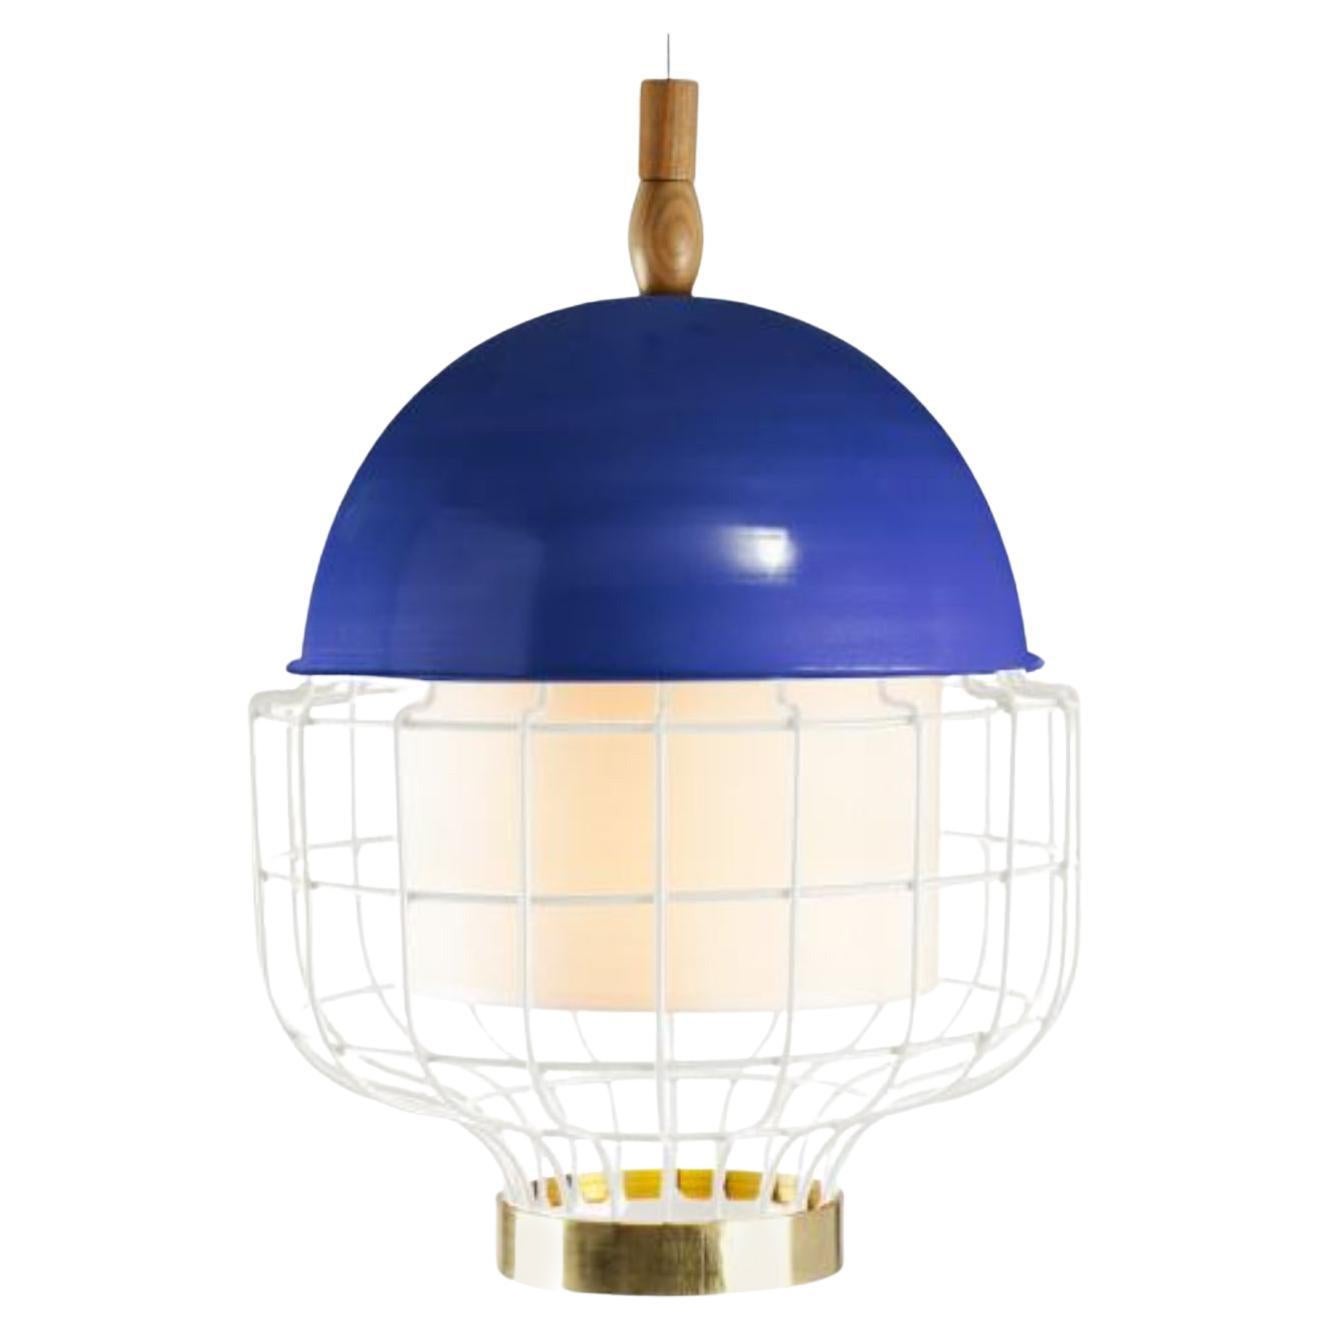 Cobalt Magnolia III Suspension Lamp with Brass Ring by Dooq For Sale